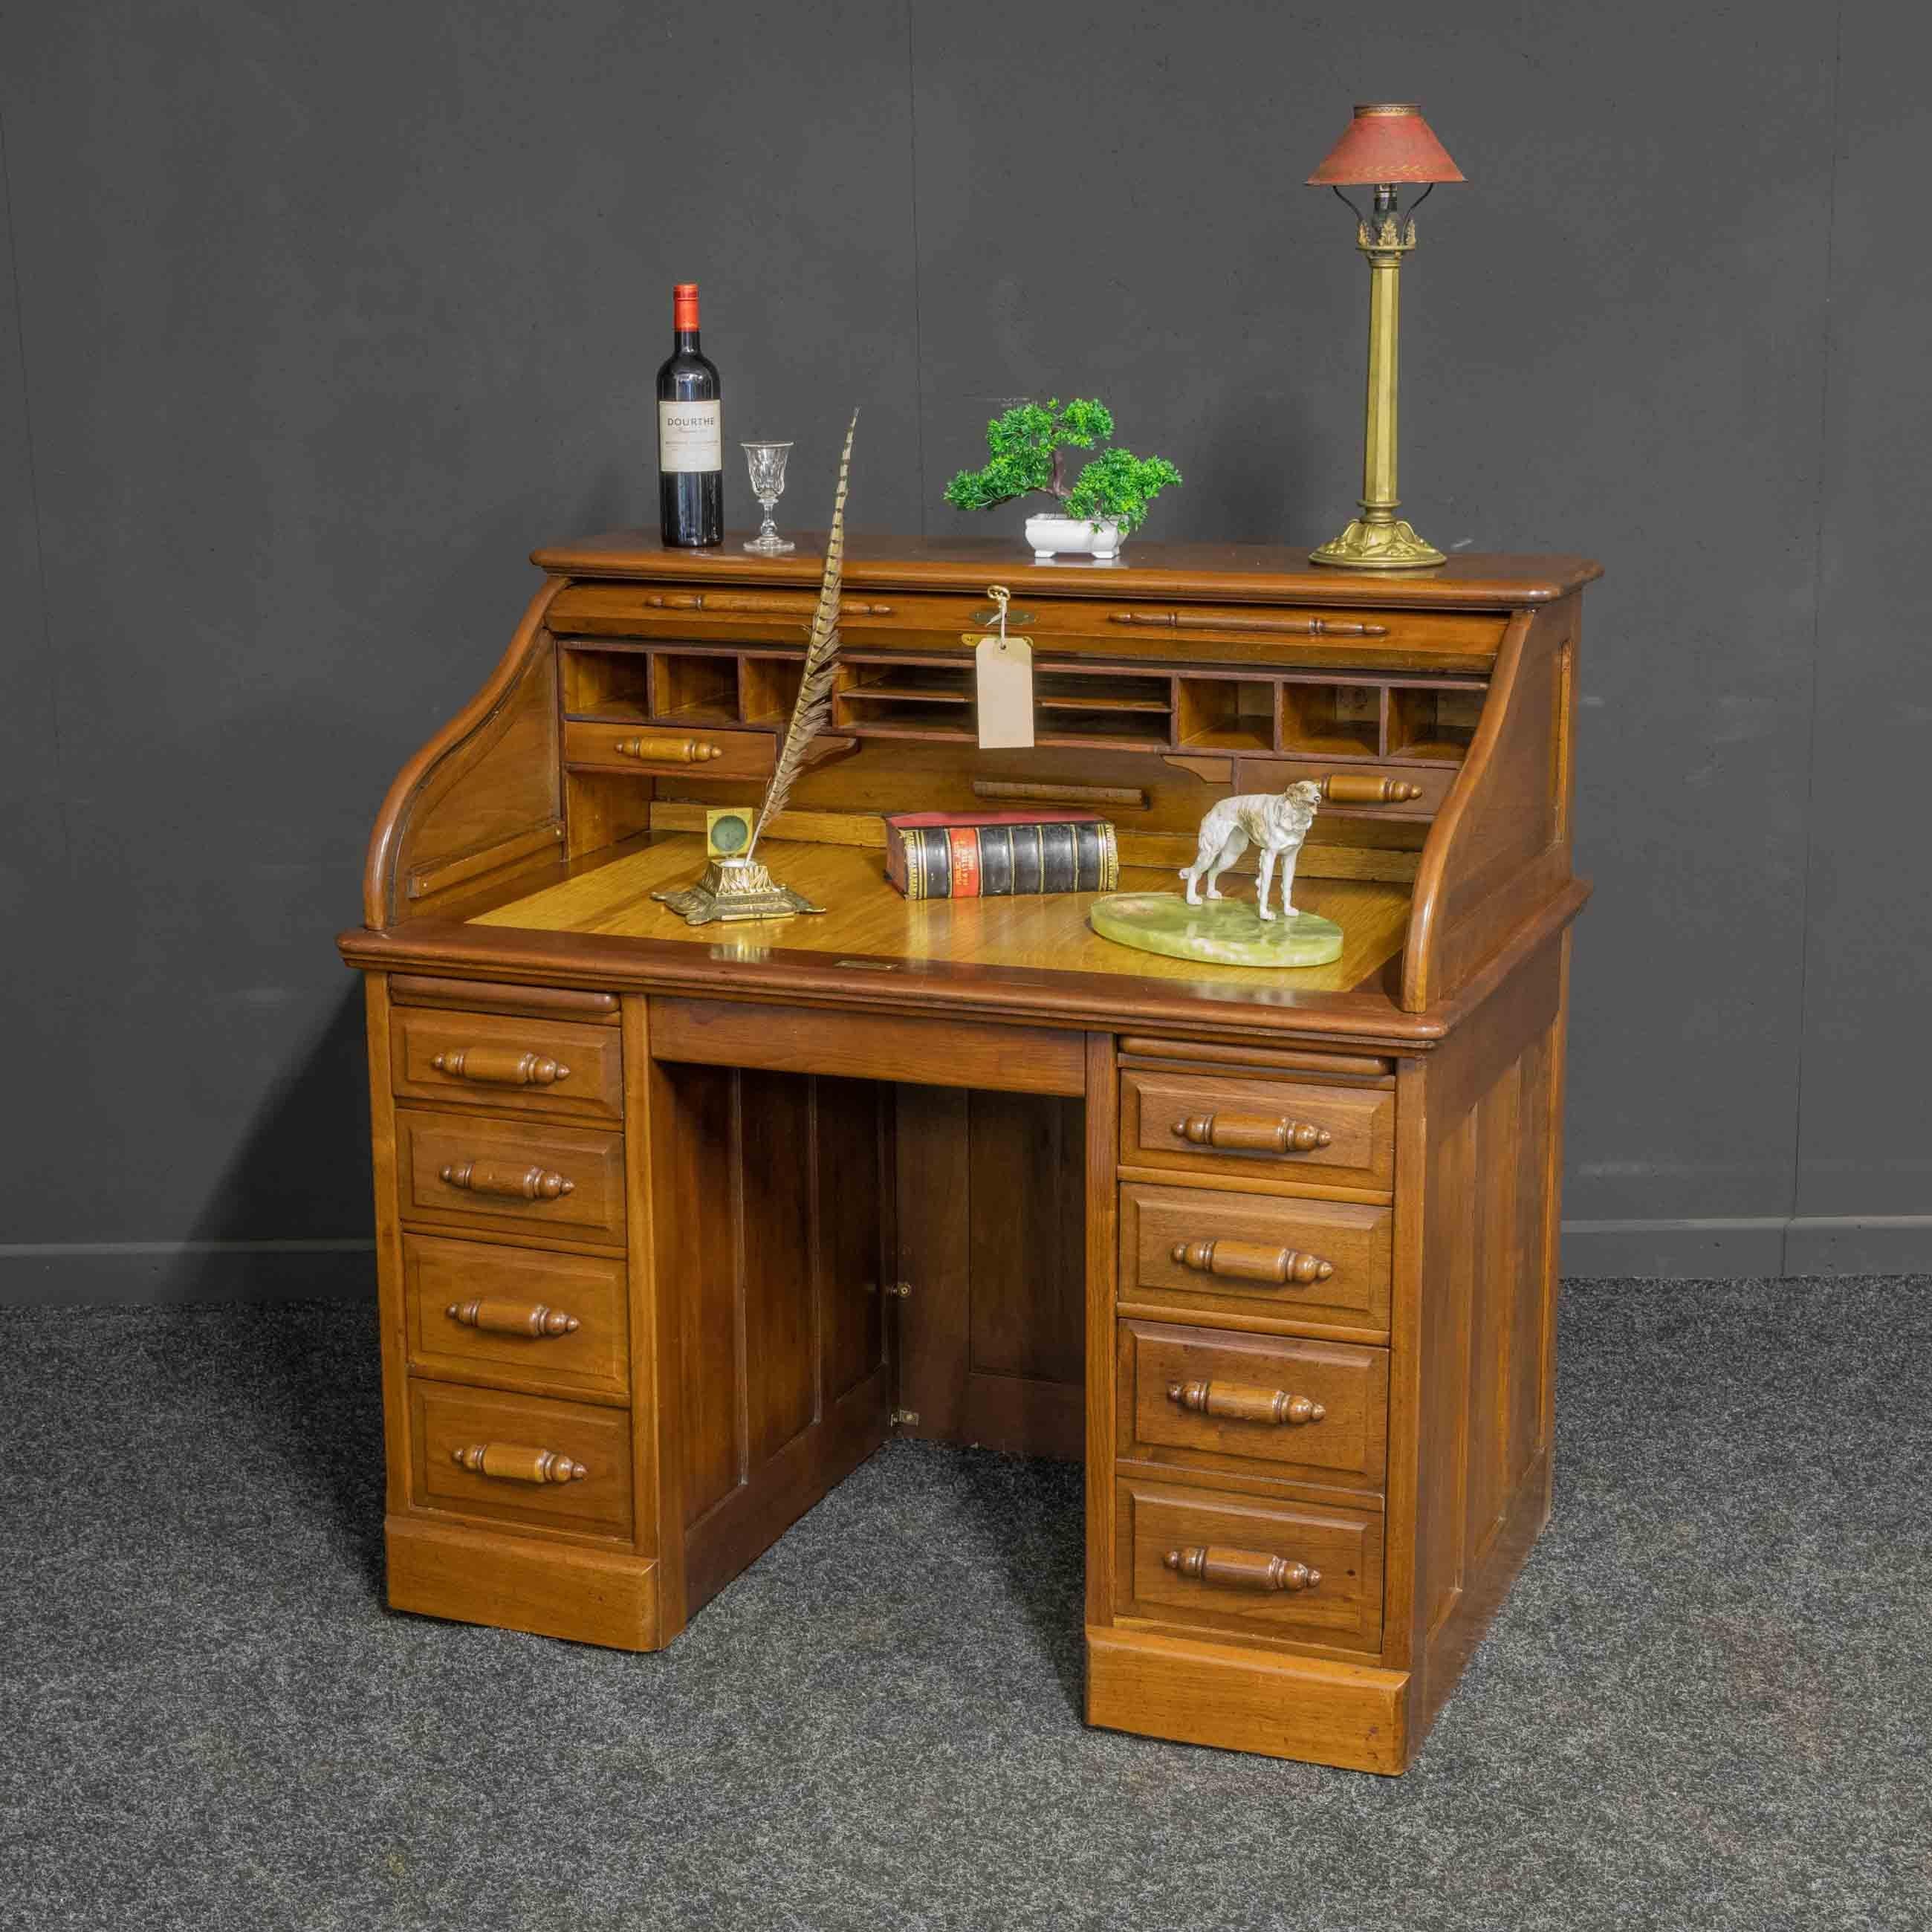 A small Edwardian roll top desk of the attractive proportions. Mostly solid walnut and in excellent condition re-polished approximately five years ago. The base pedestals have seven drawers, the bottom right being double height, all with the